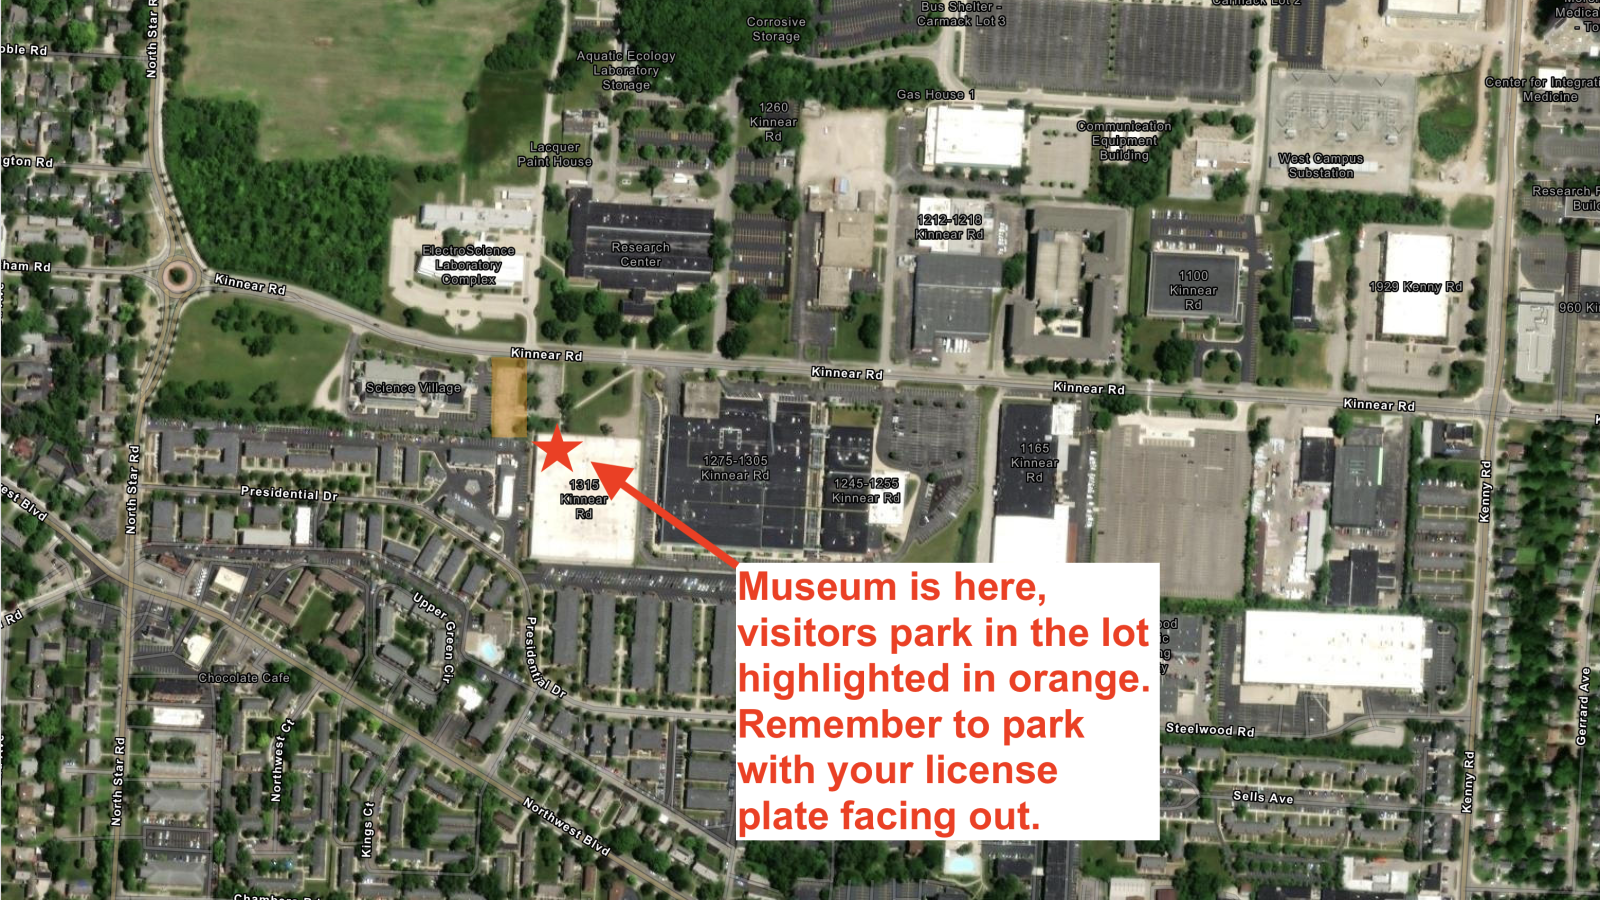 Map showing location of Museum and Parking lot.